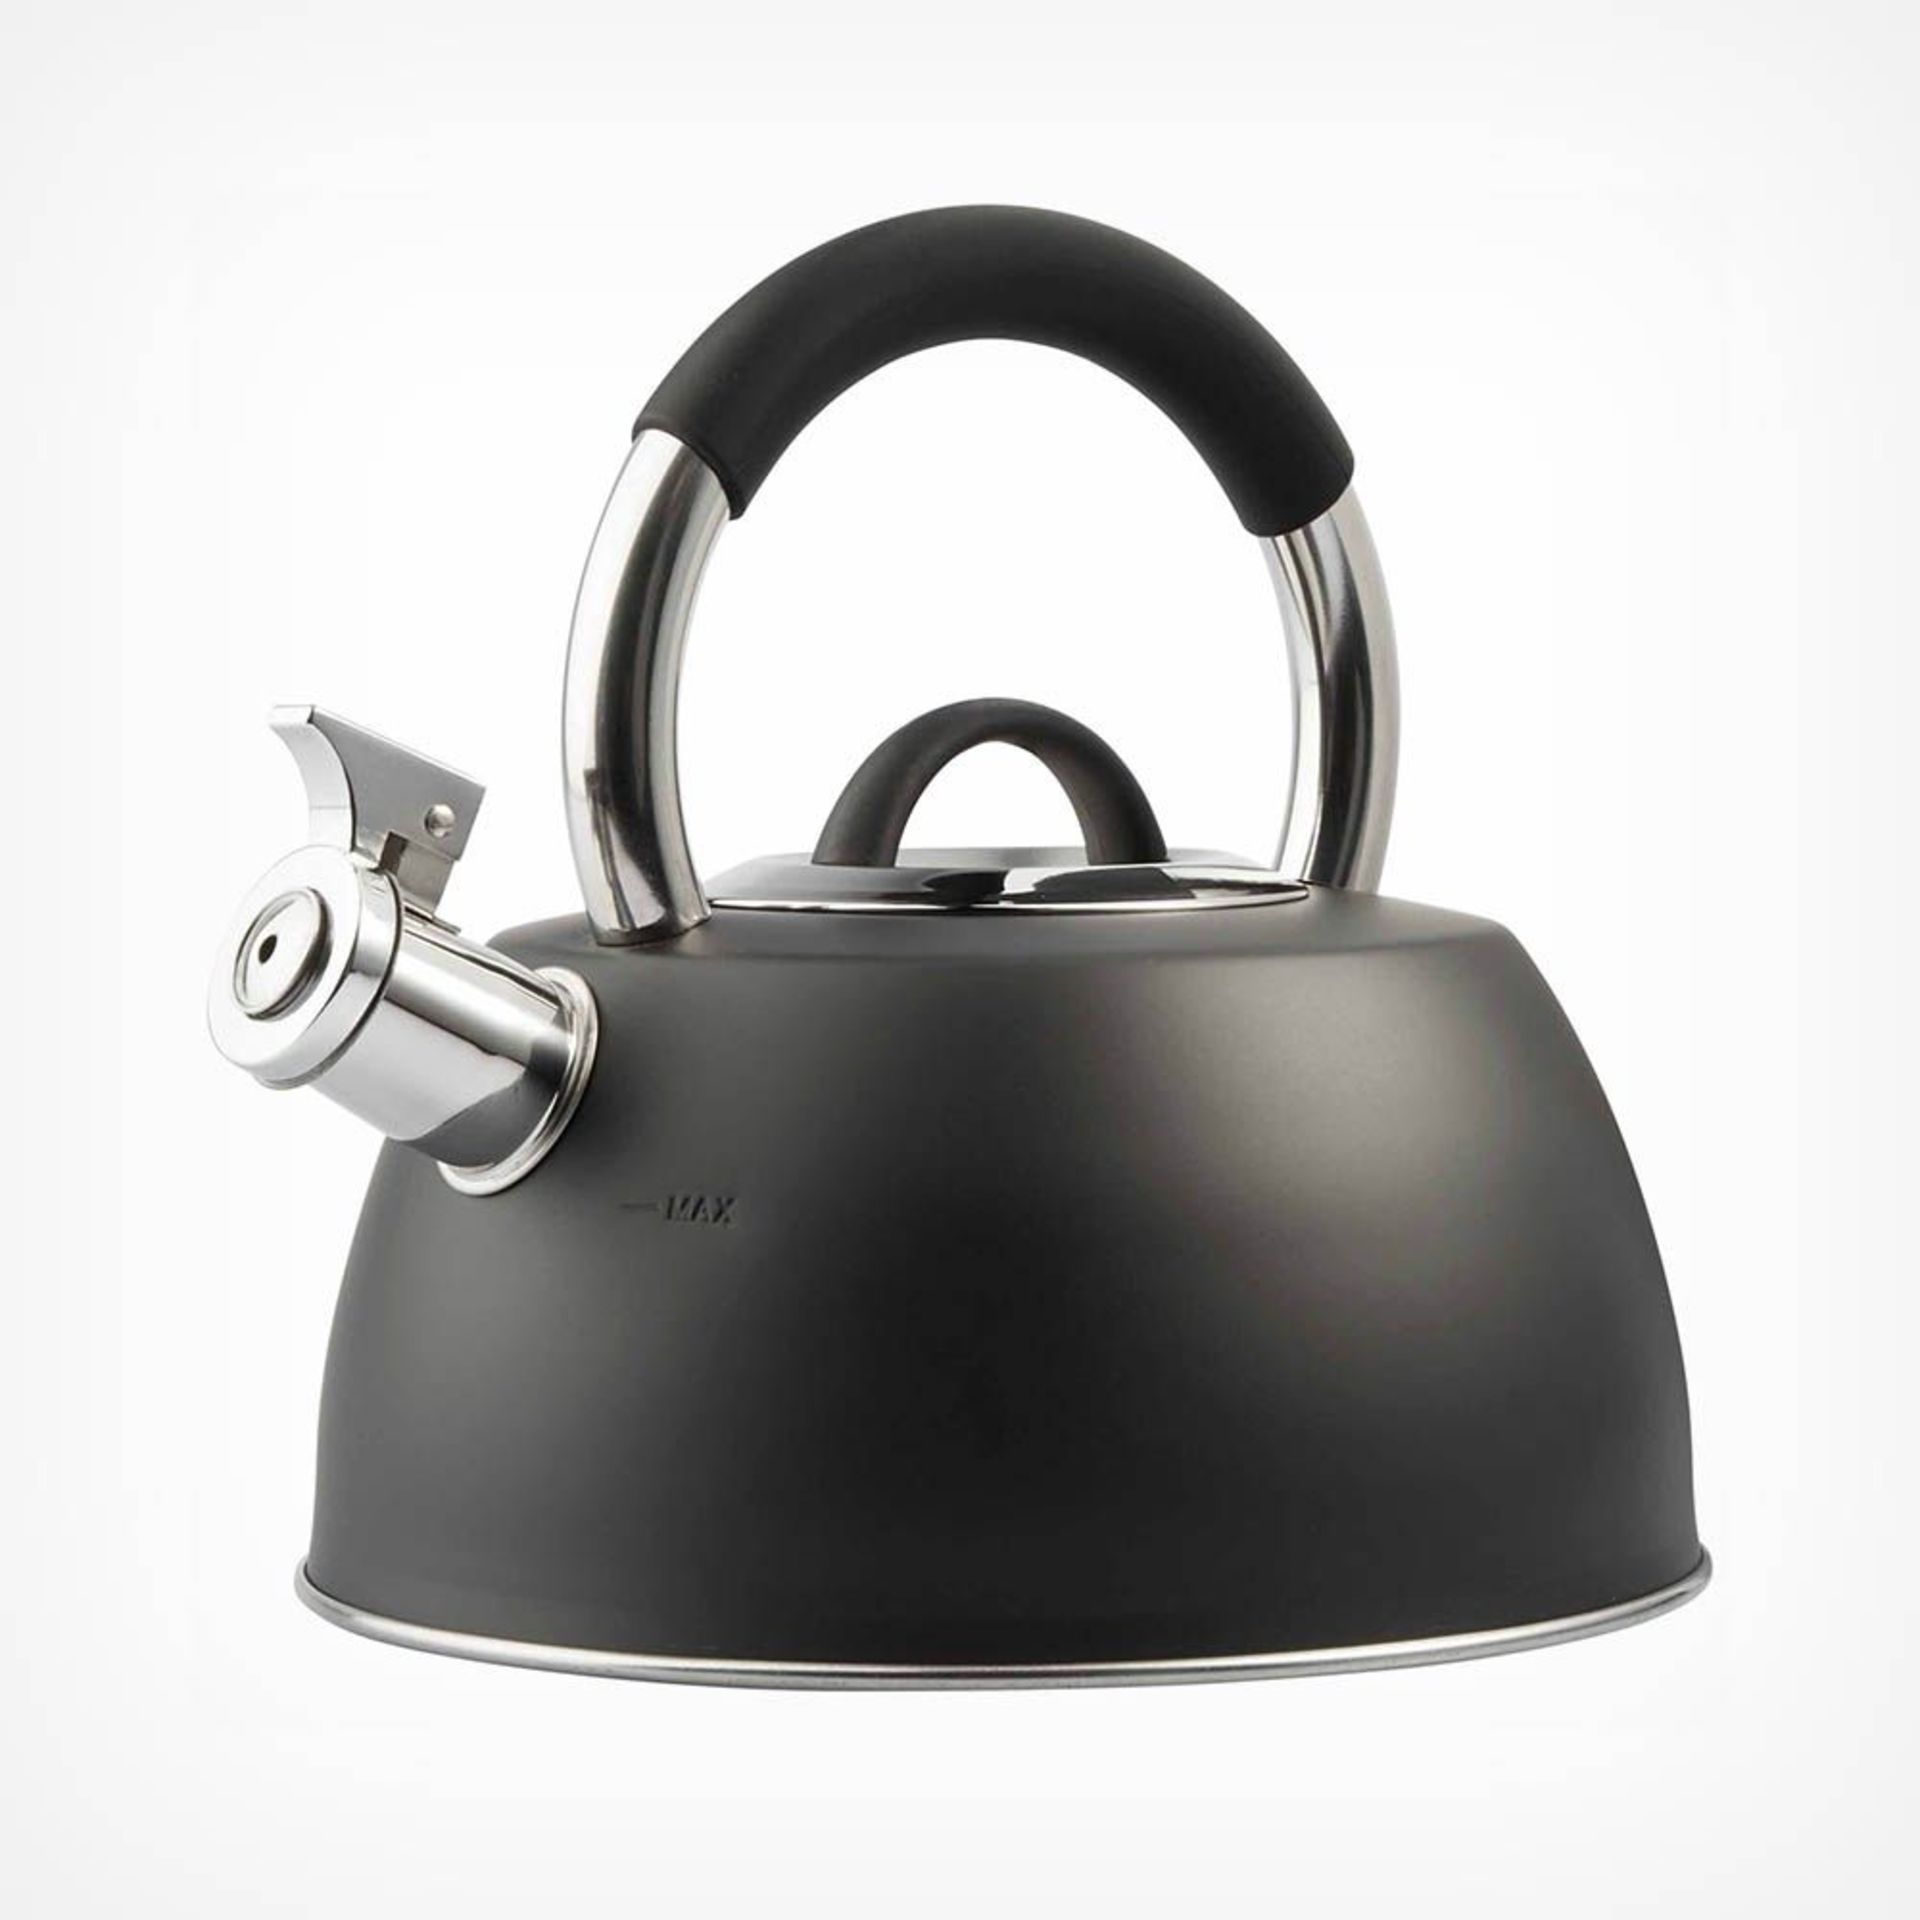 2.5L Black Whistling Stove Top Kettle. - BI. If you’re looking to add a touch of vintage elegance to